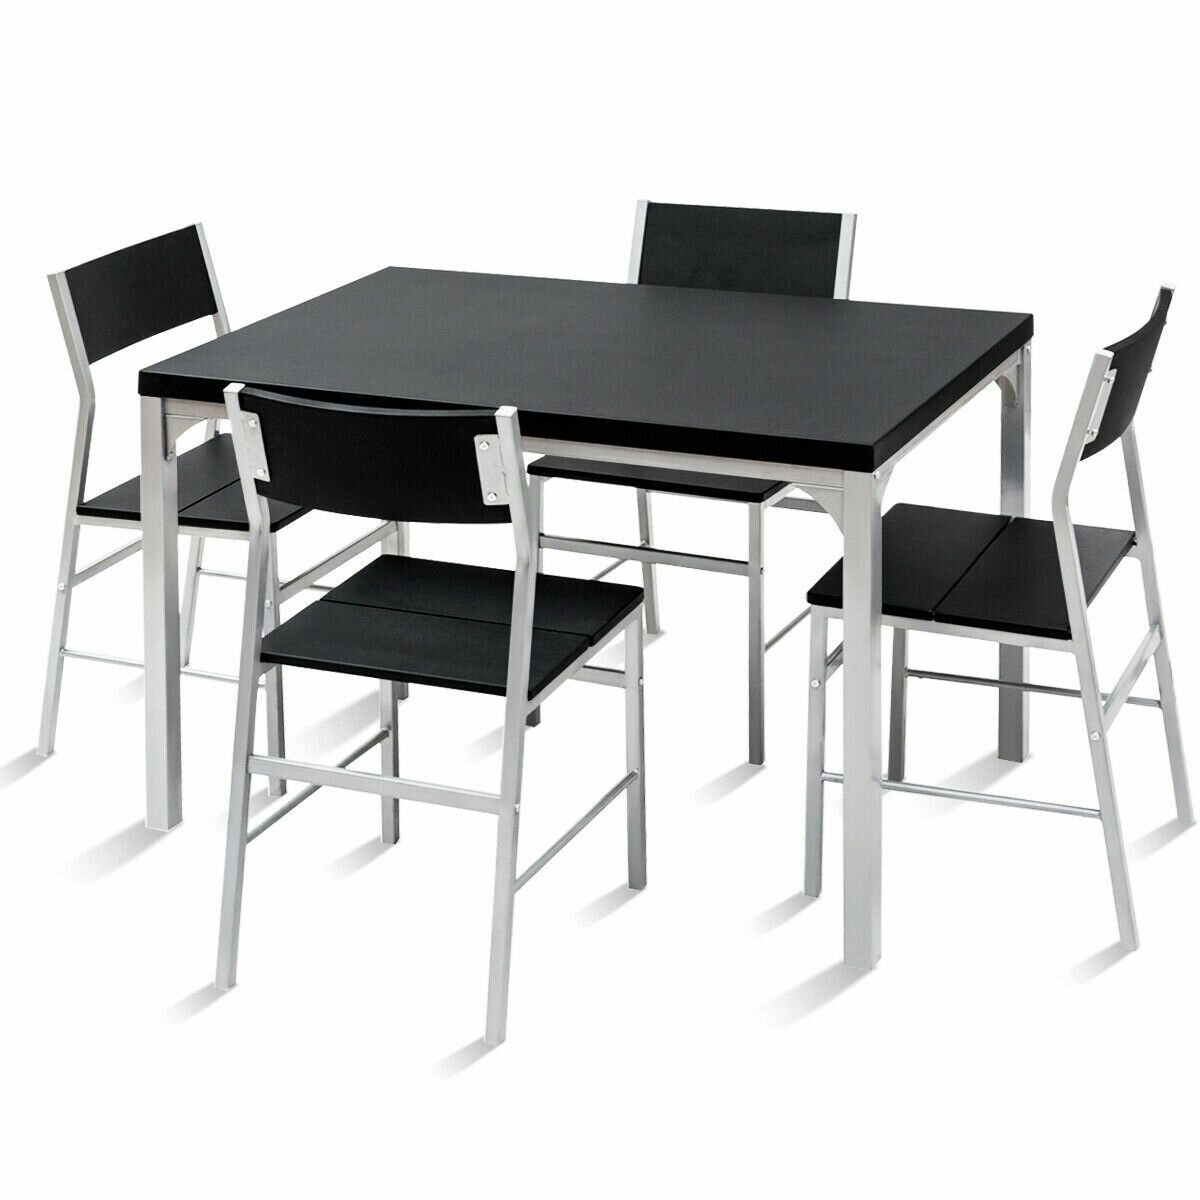 Catalina 5 Piece Dining Set With Regard To Most Current Stouferberg 5 Piece Dining Sets (View 2 of 20)